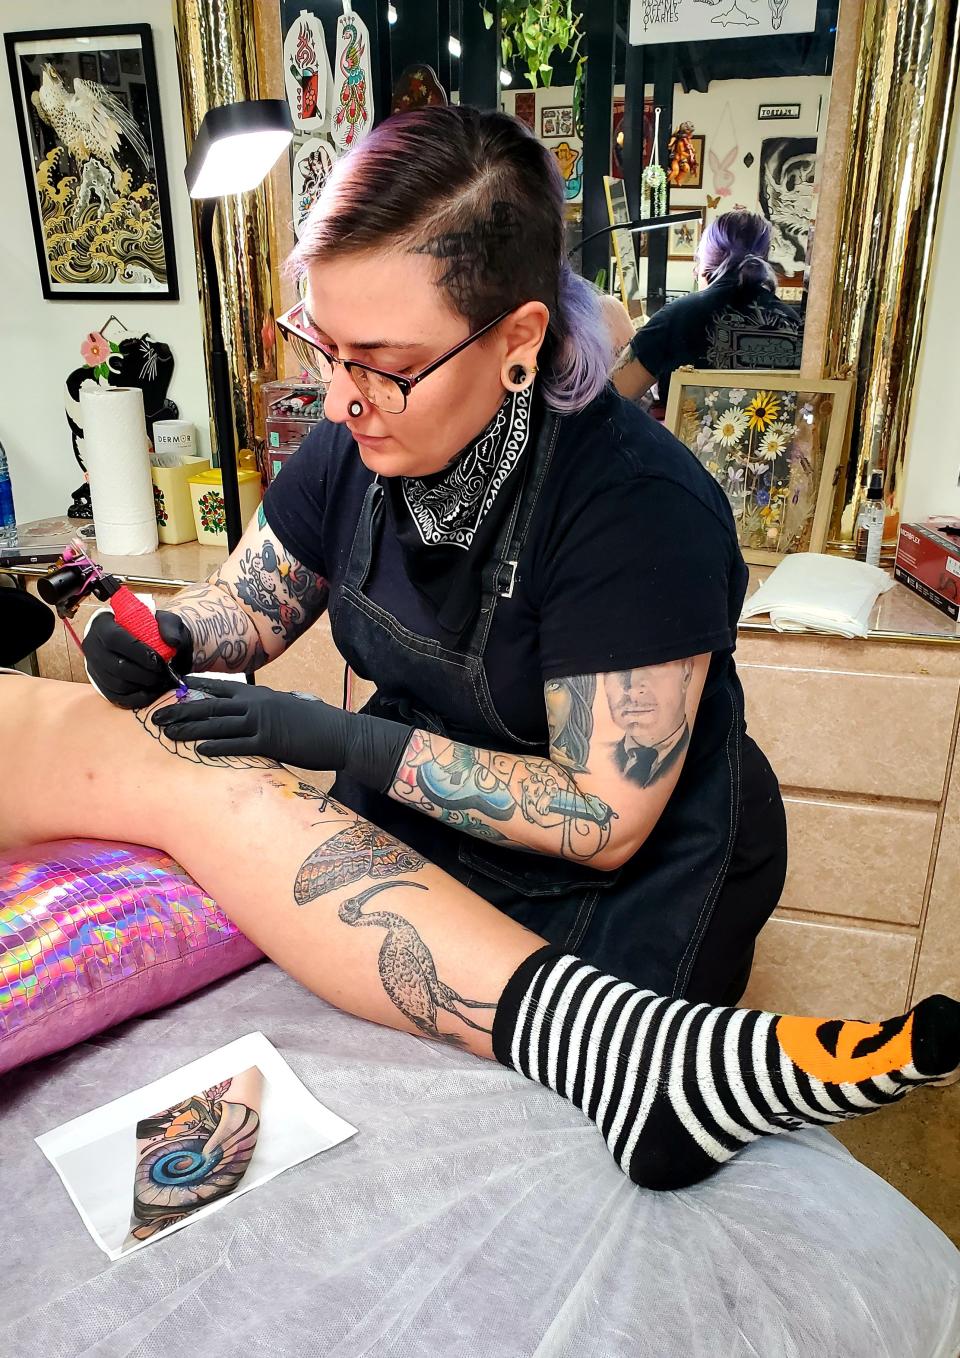 At Lady Magnolia Tattoo in Dallas, Texas, artist Andrea Patterson, 31, colors in an image of an ammonite for patron Kate Pelusio, 34, on Friday, July 1, 2022. Patterson planned to take part in the shop's pro-choice flash sale later in the month to benefit abortion-rights advocacy organizations.